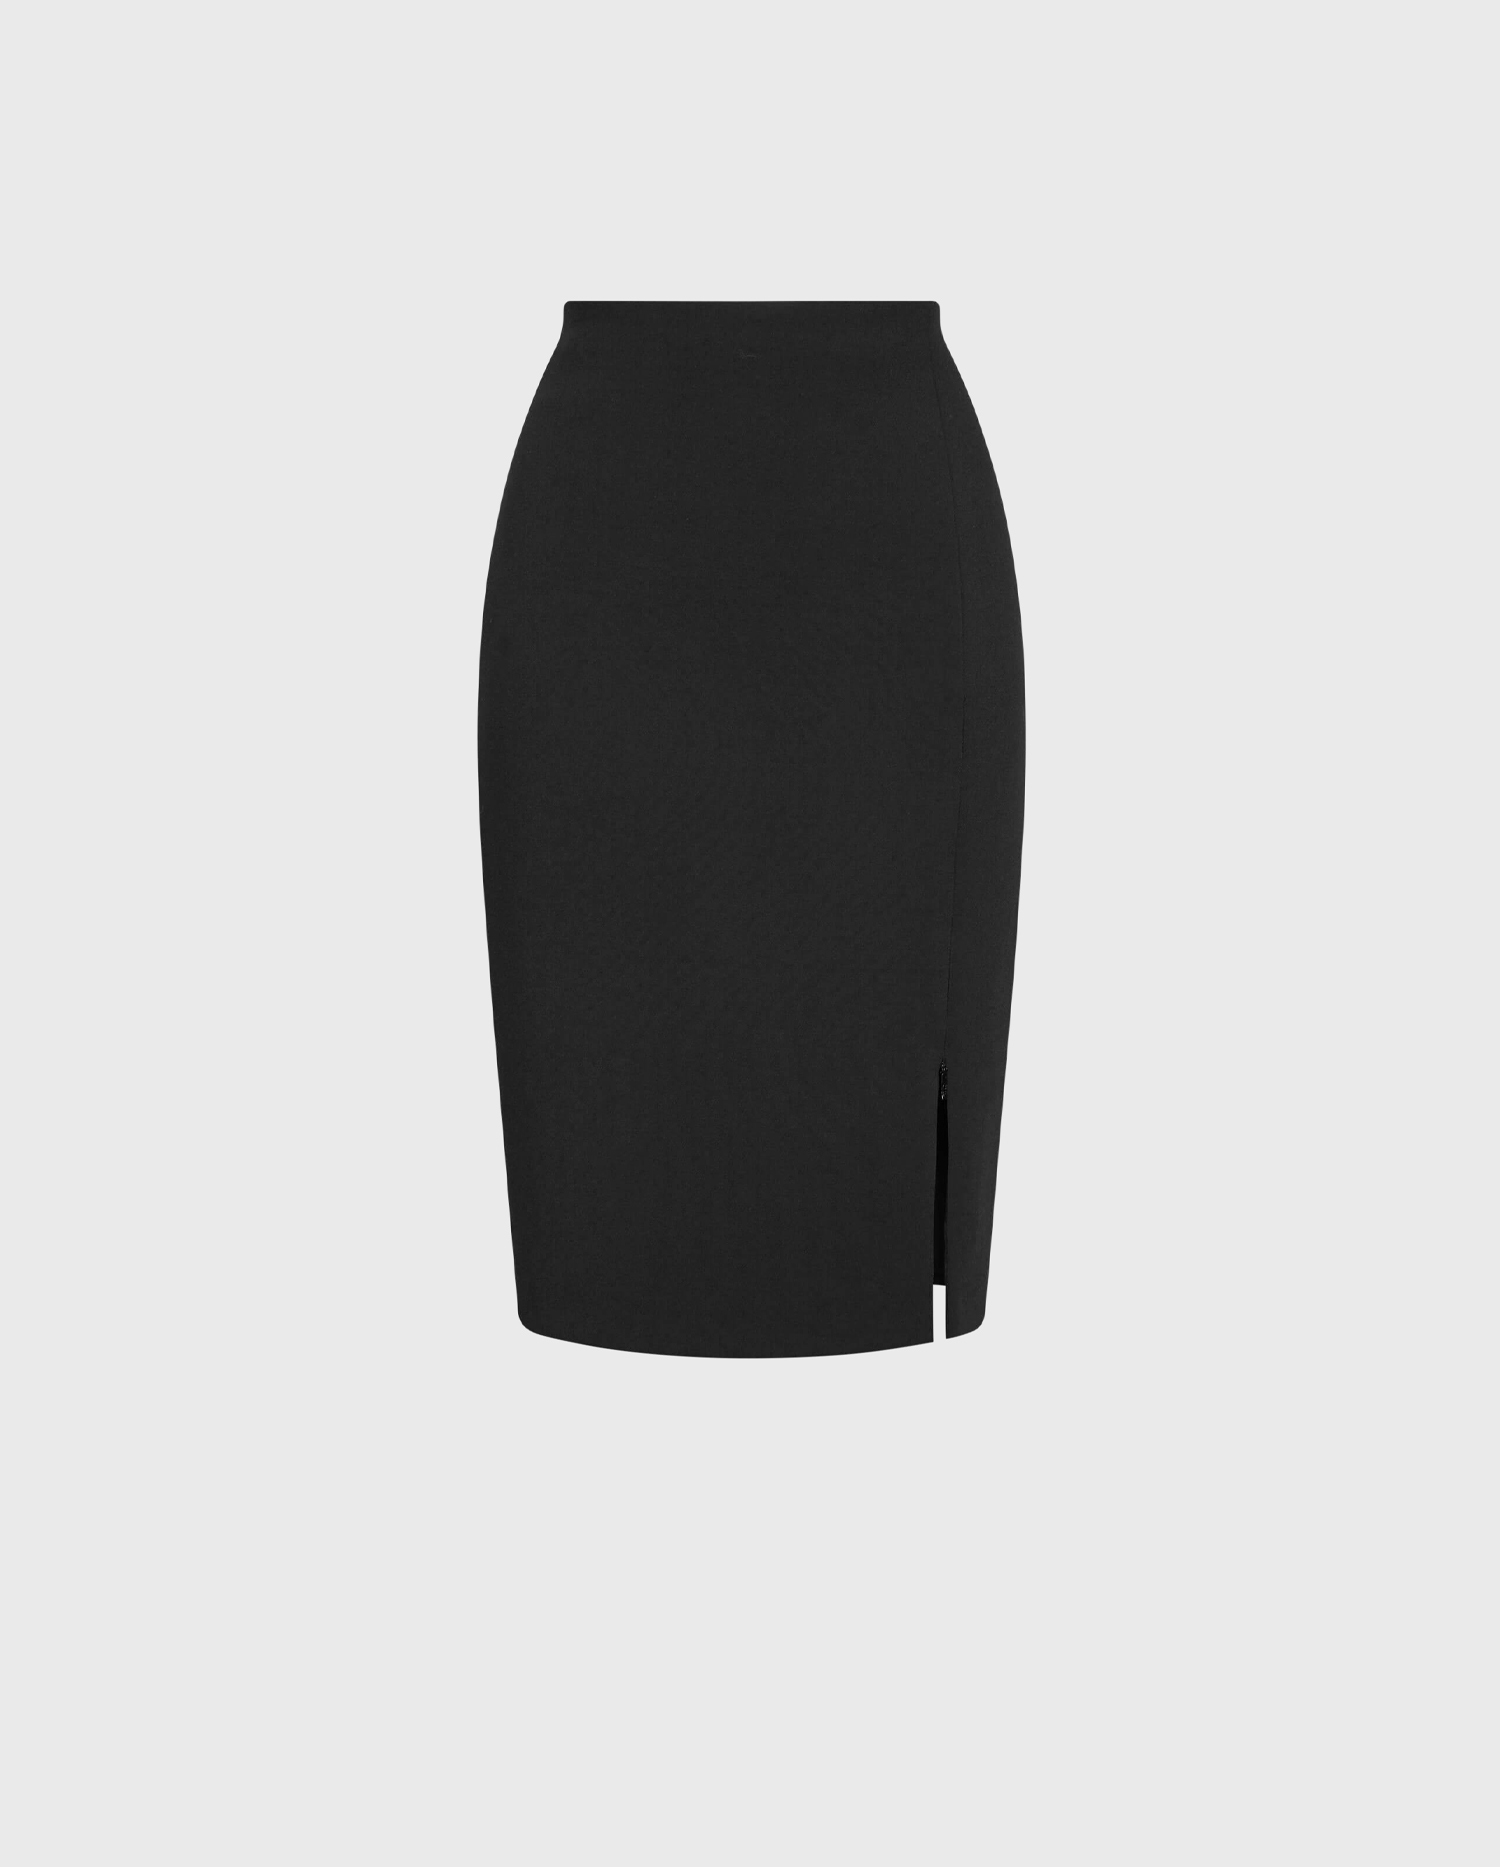 Discover the ABELLA Thick Black Crepe Skirt With Zippered Slit from ANNE FONTAINE